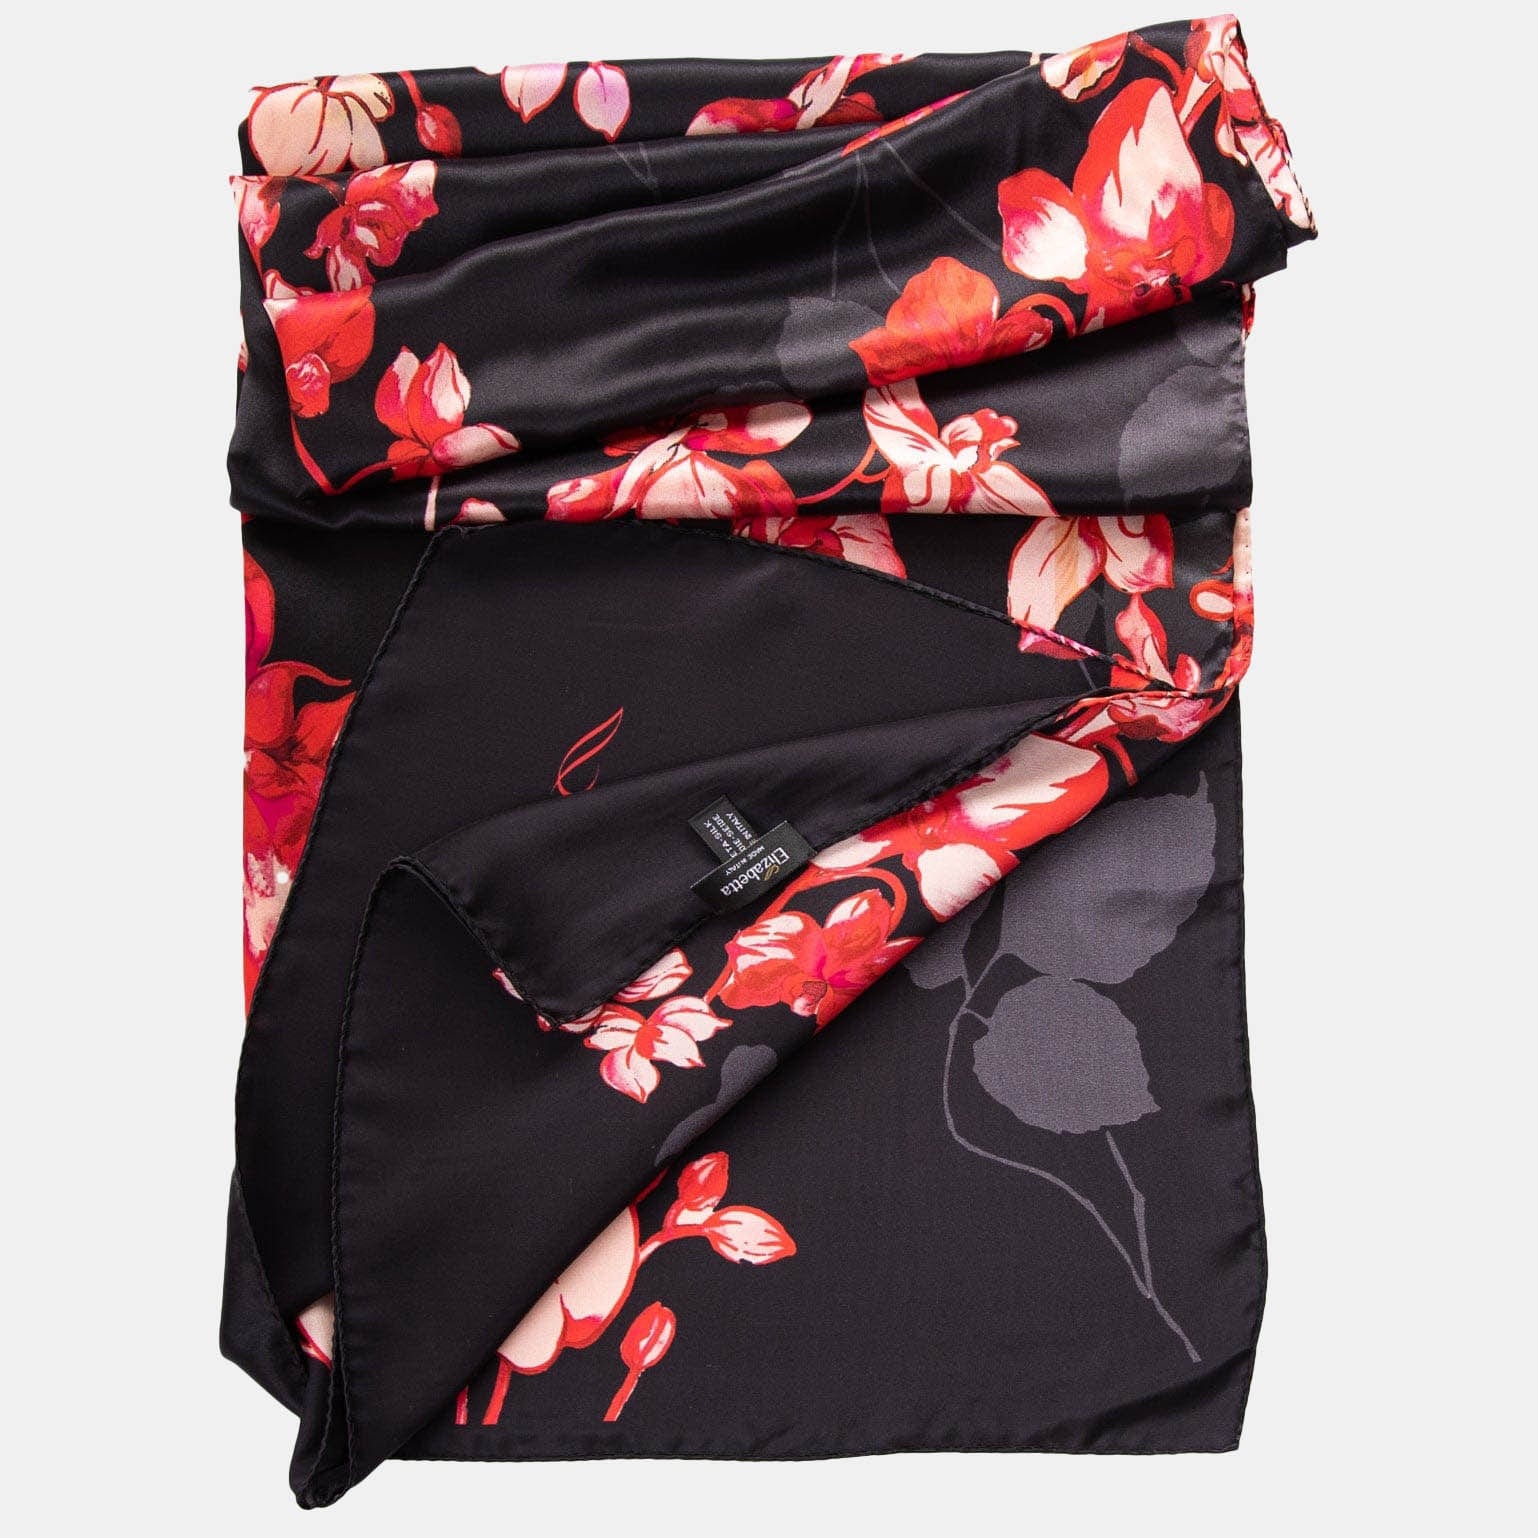 Victoria's Secret  NWT Limited Edition Red Black Floral Large